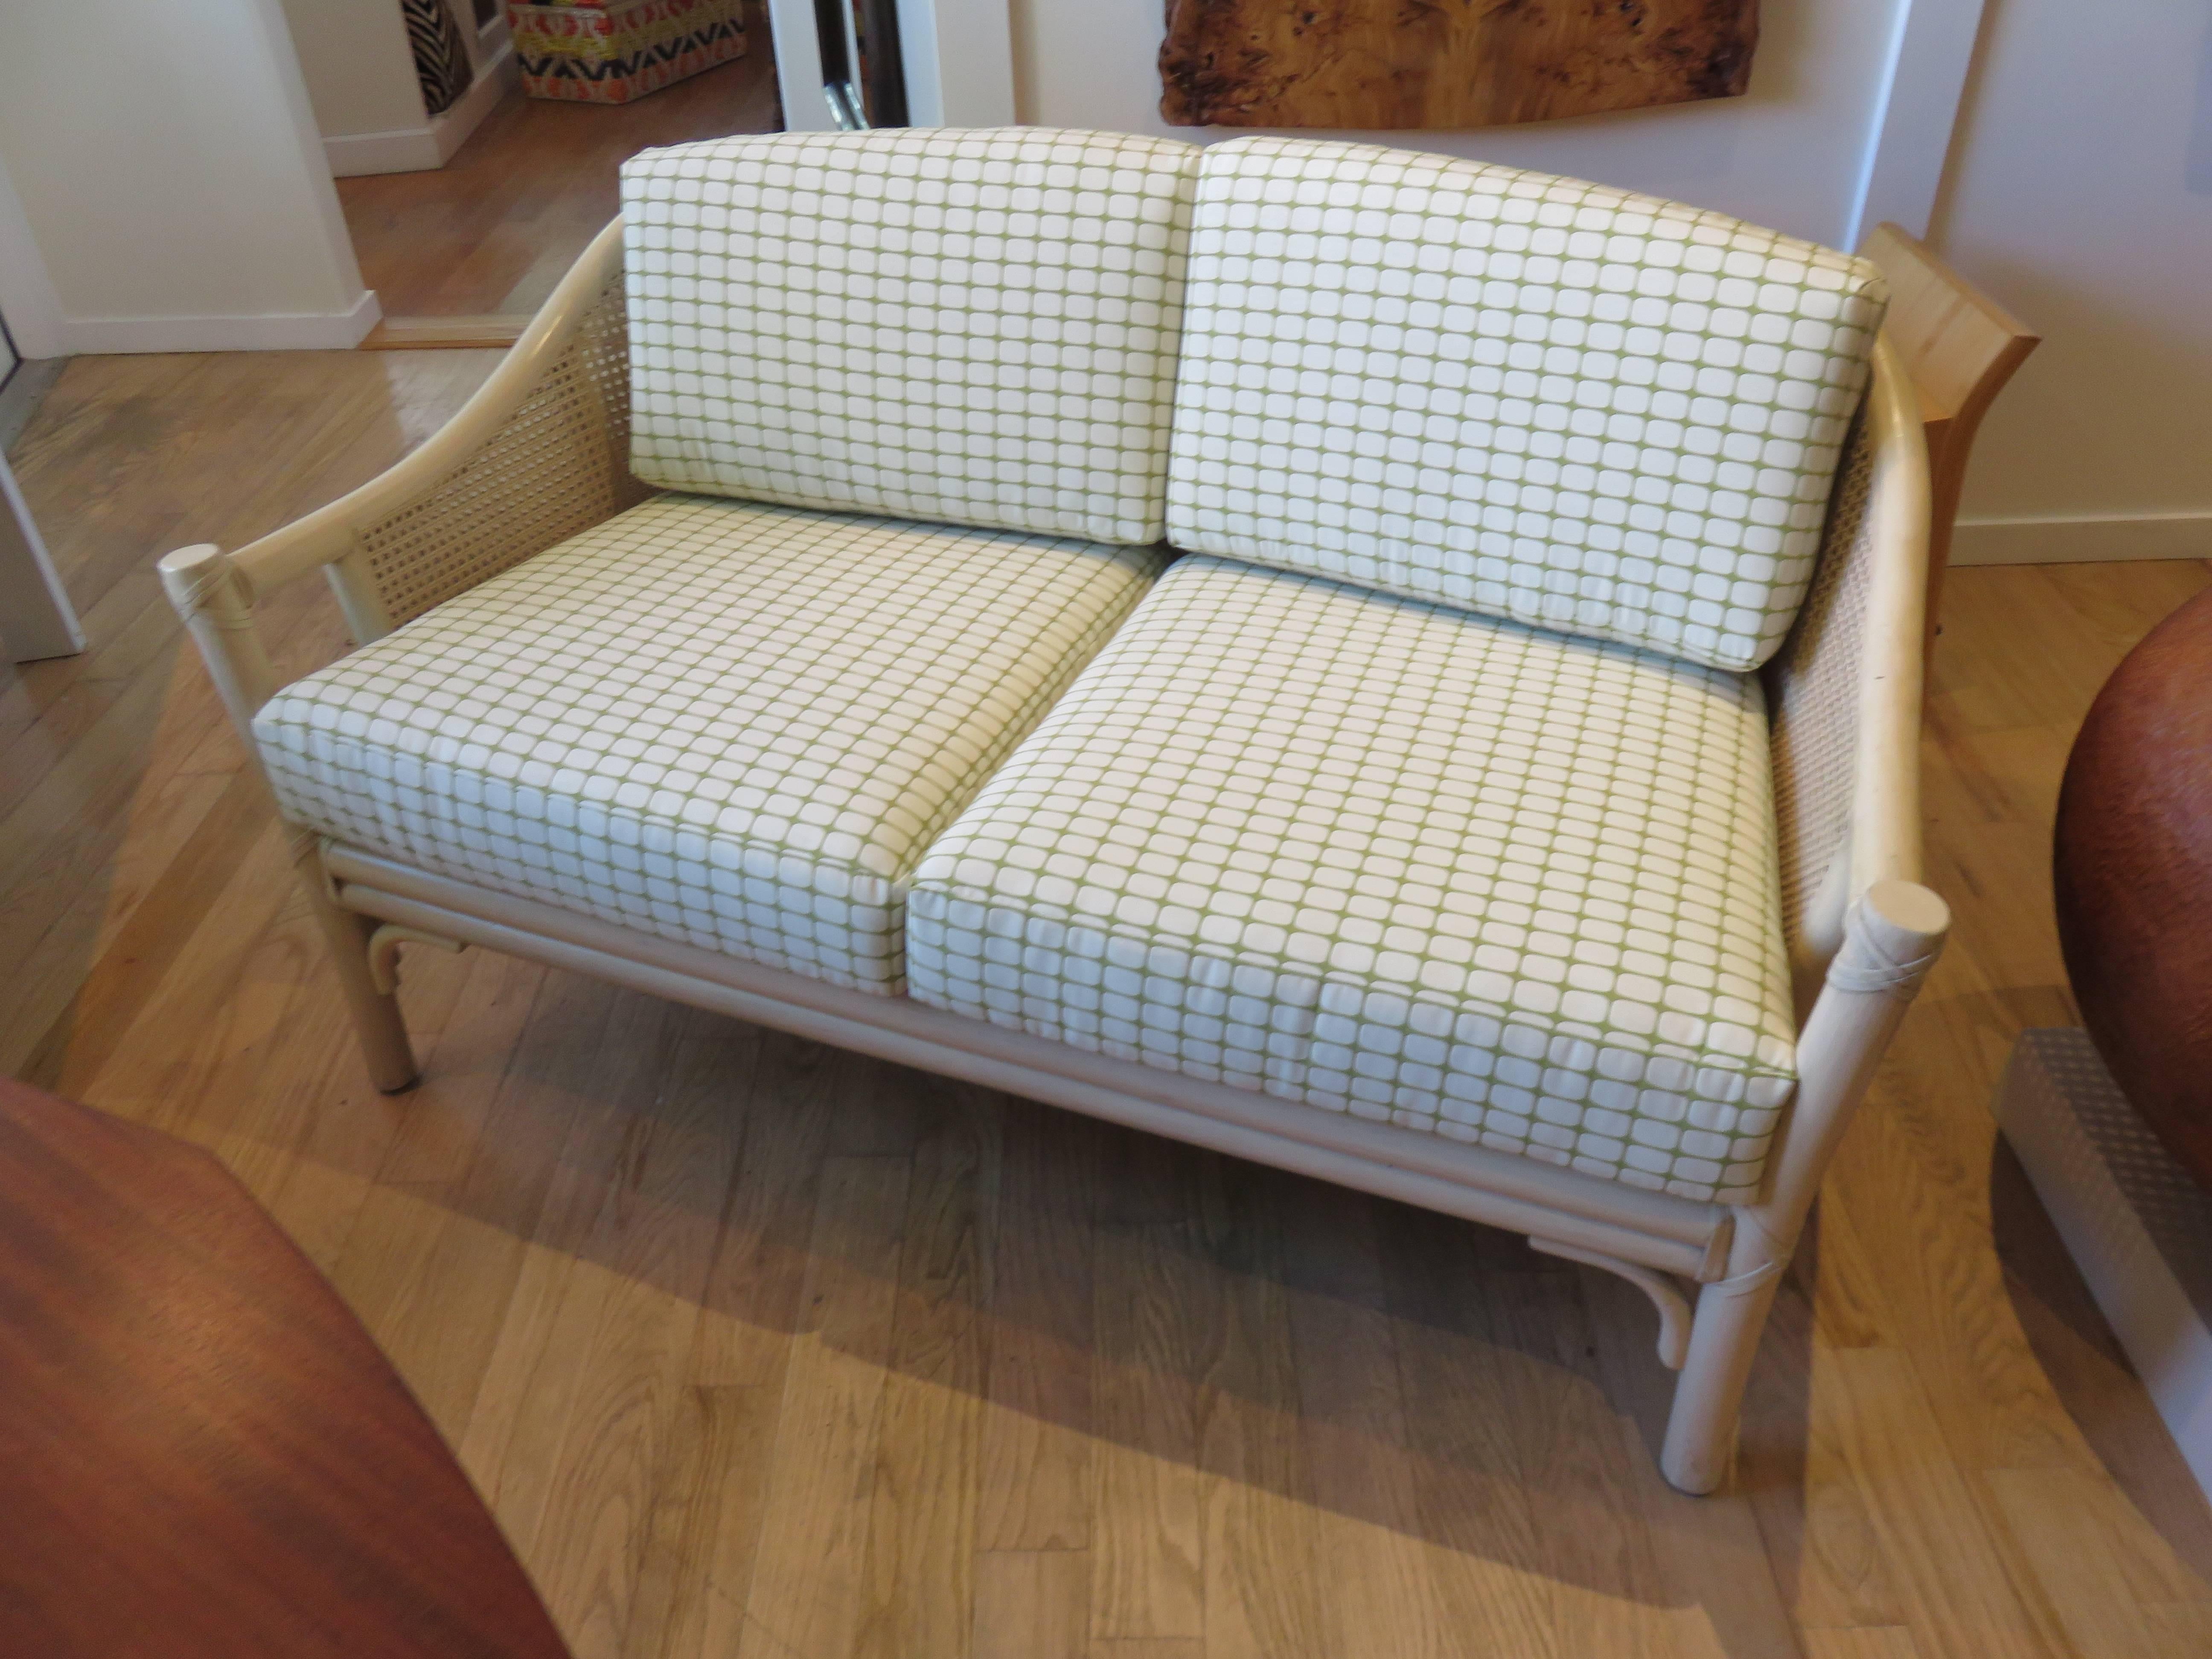 A two-seat bamboo and cane McGuire settee from the 1960s.
New upholstery in a a retro style Kravet fabric. Four apple green and beige 
dacron and foam filled cushions. The frame and cane stone beige finish is original.
There are two matching